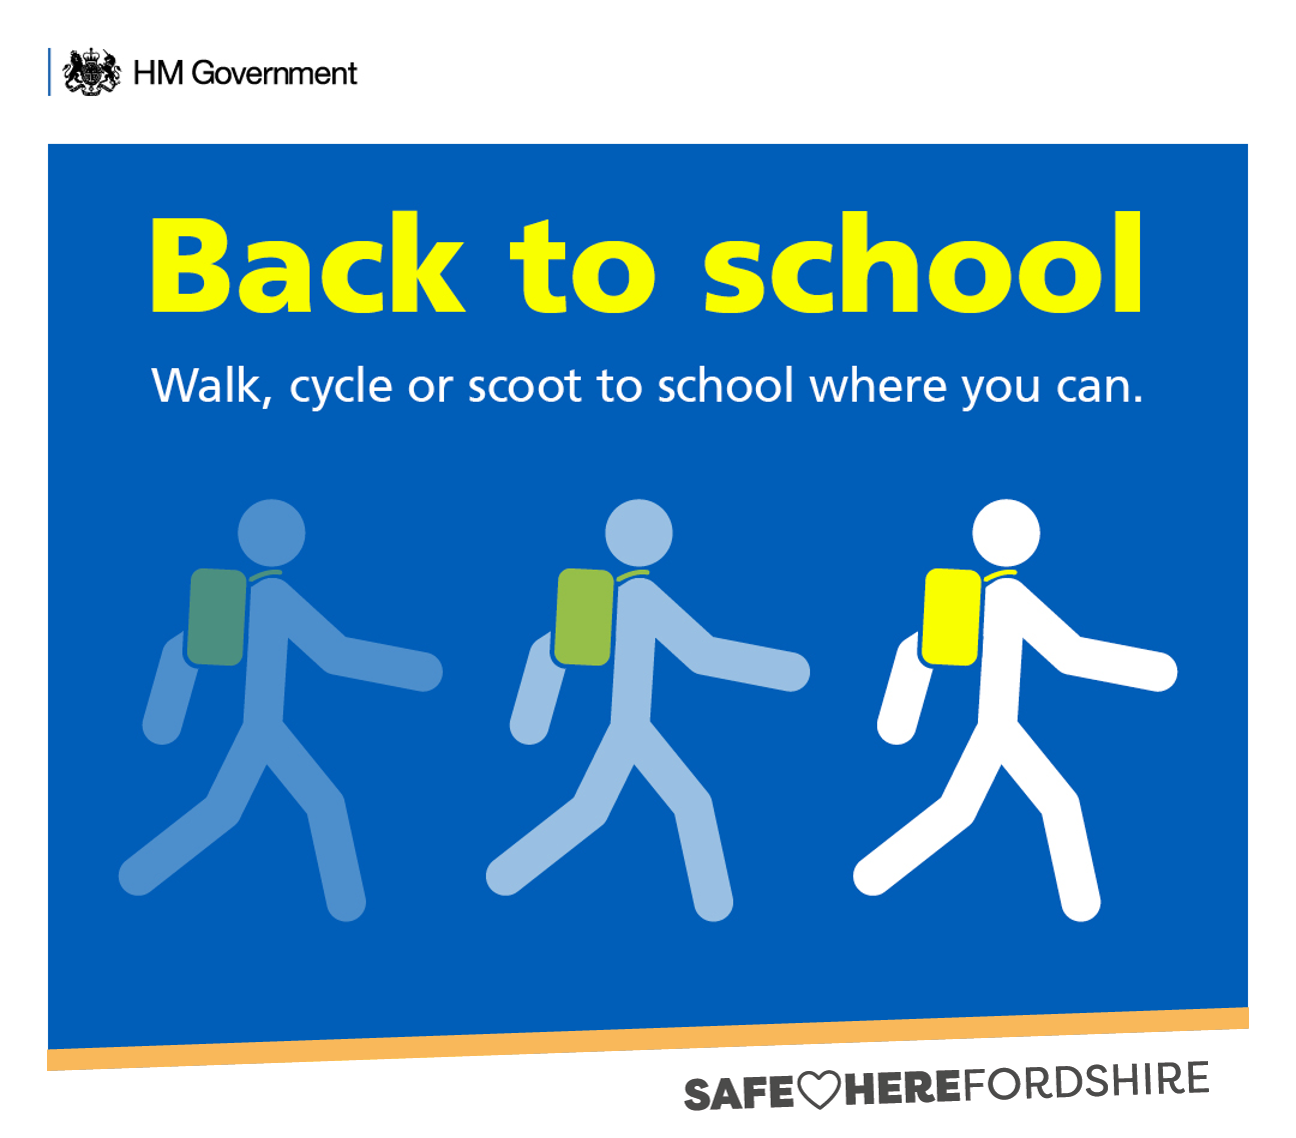 Graphic tect - Back to School, walk cycle or scoot to school where you can